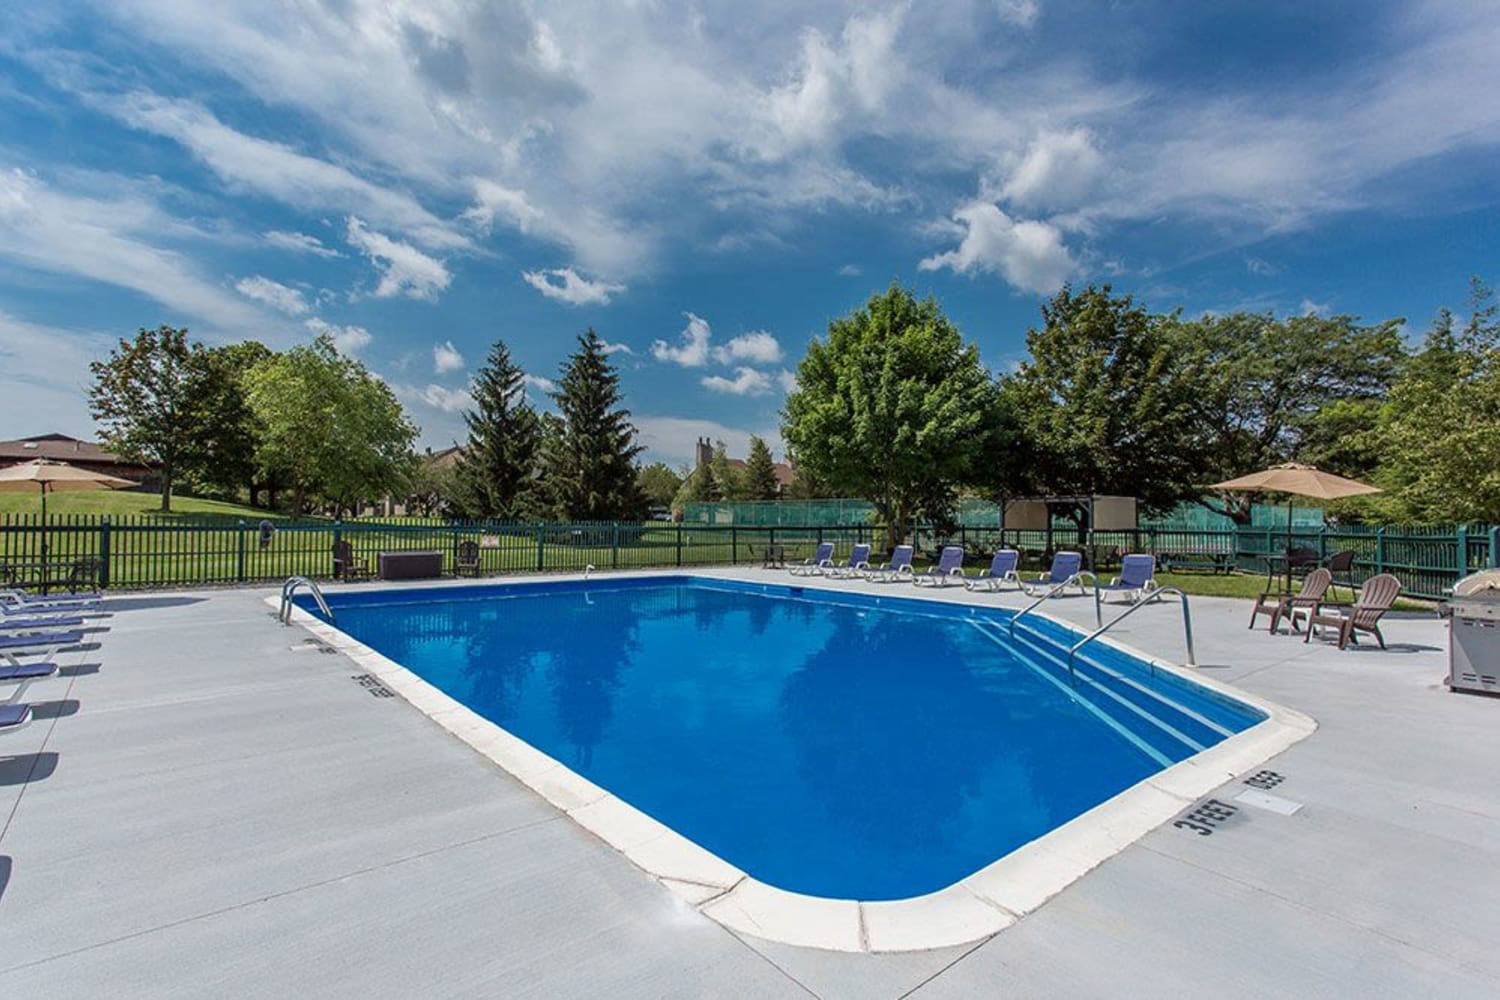 Swimming pool at Steeplechase Apartments in Camillus, New York